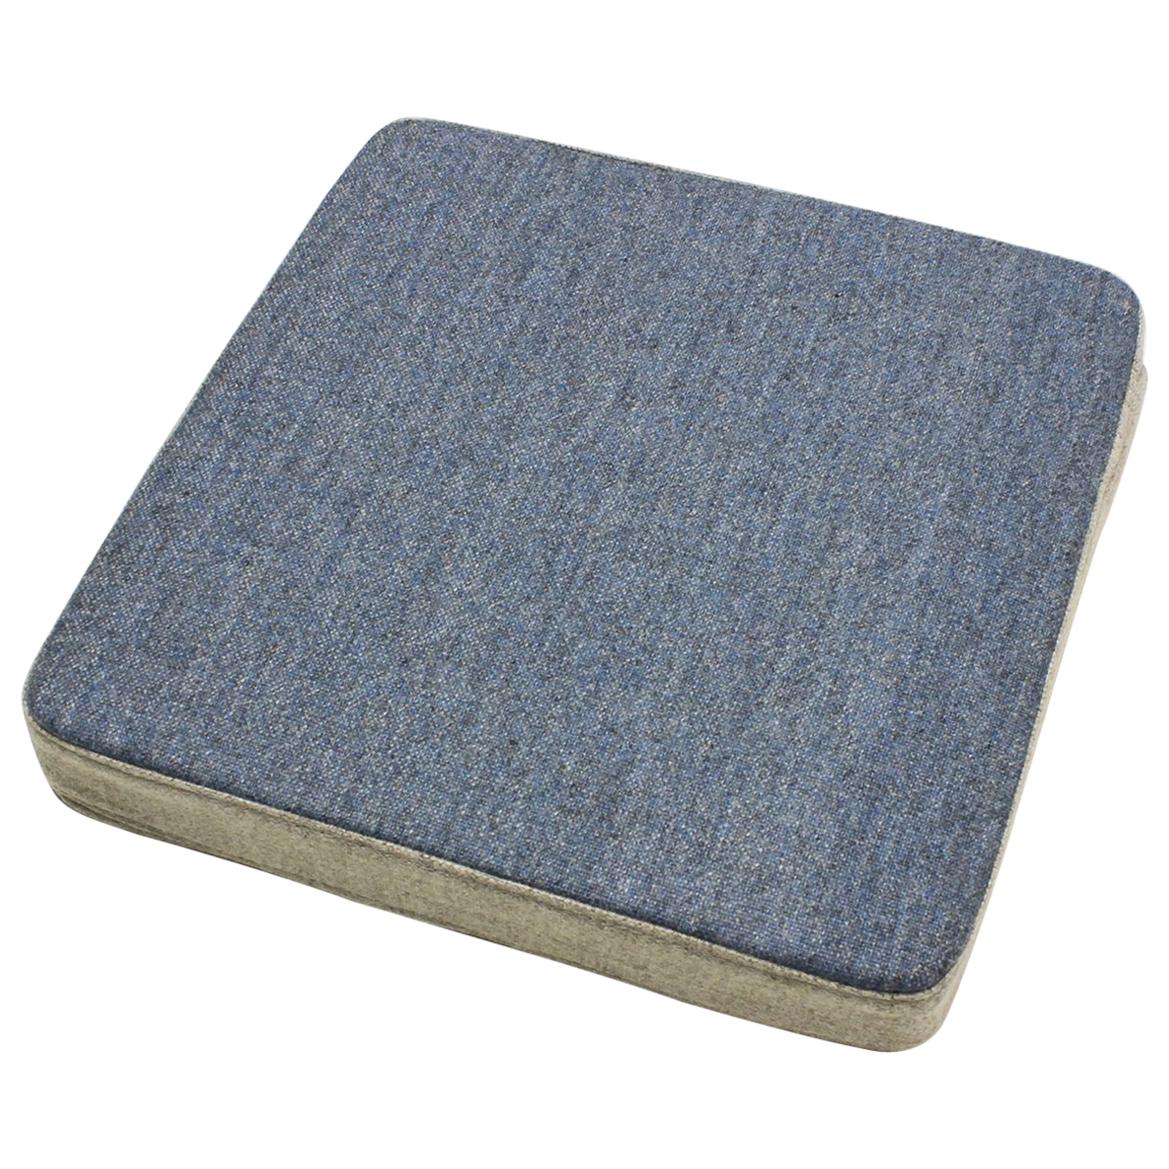 OPE, Ope Select, Cushion or Sound Absorber, Blue im Angebot